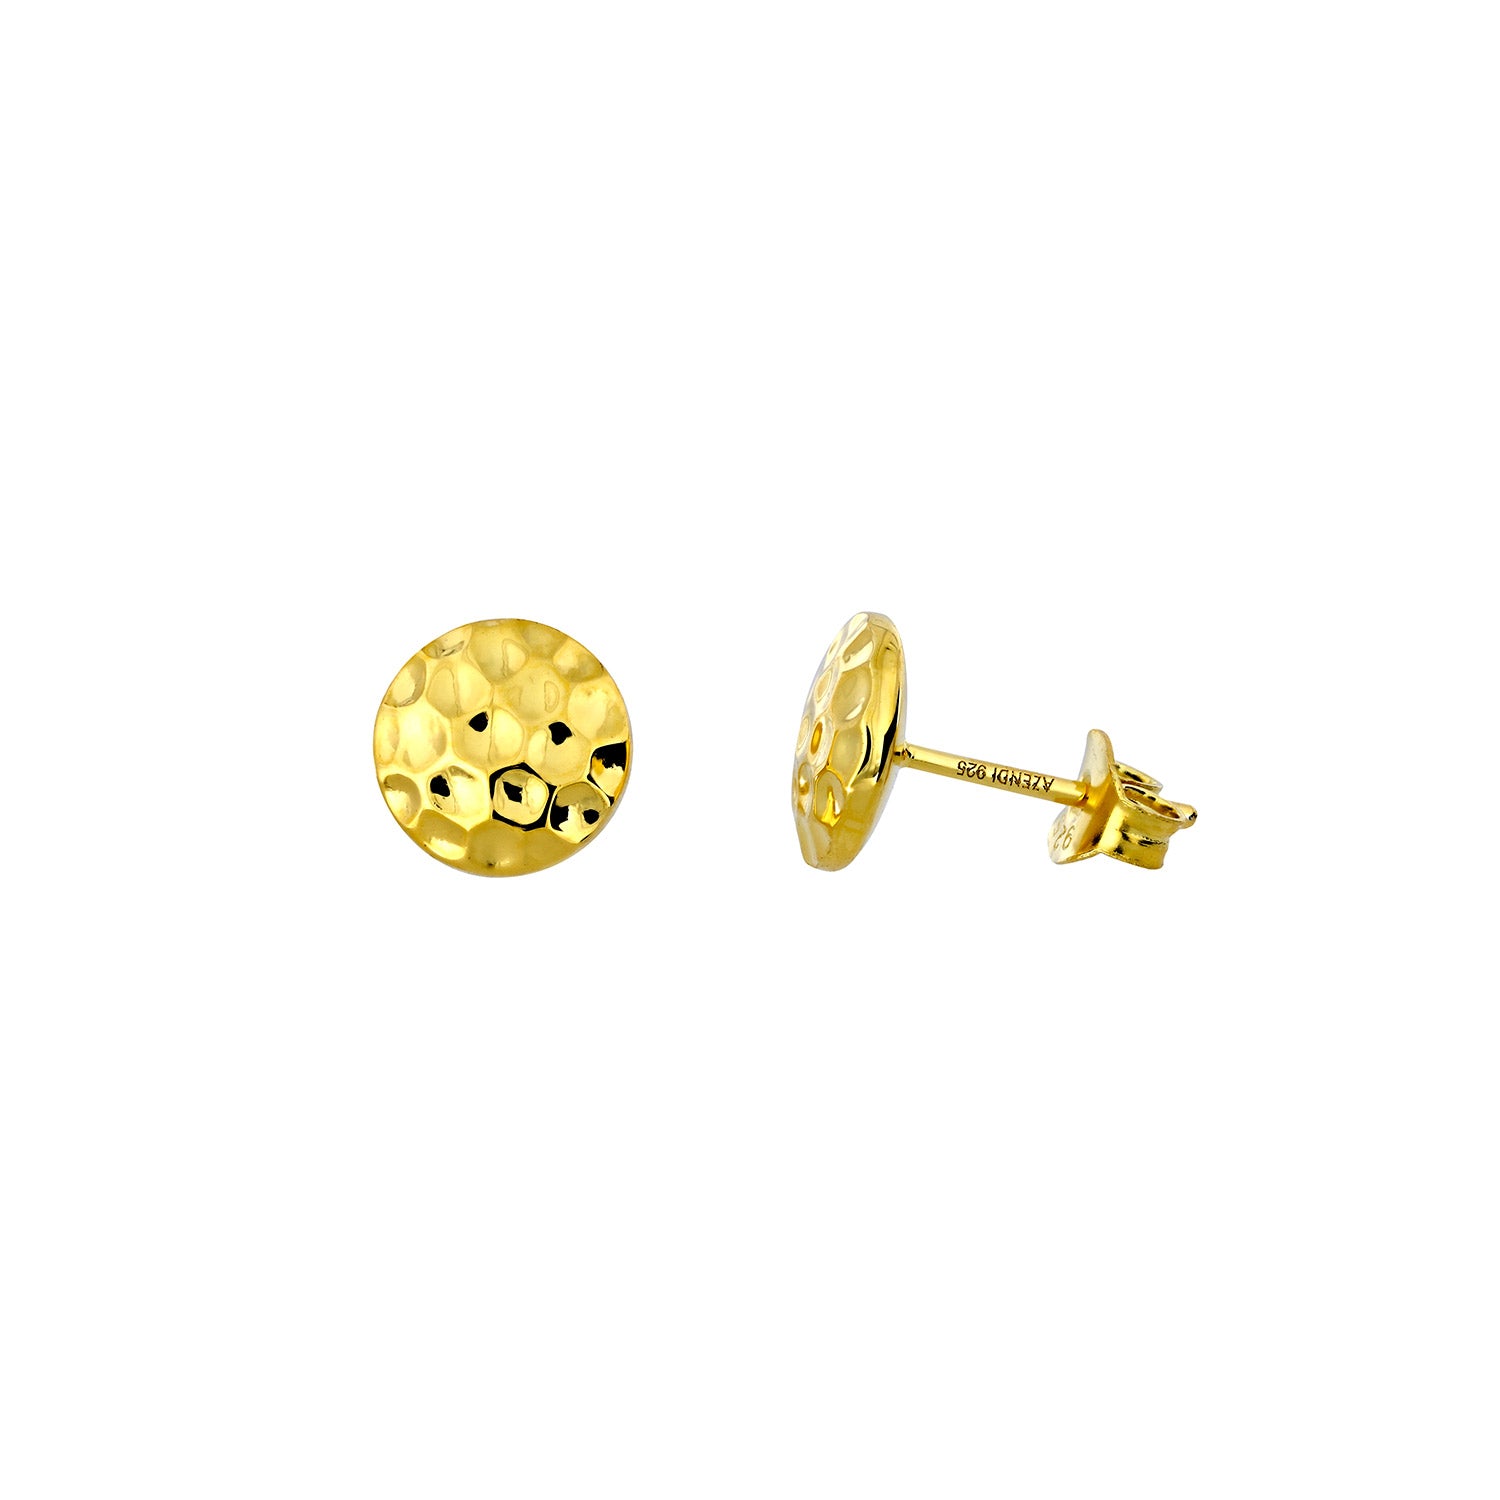 Planished Double Curved Button Stud Earrings - Yellow Gold Vermeil